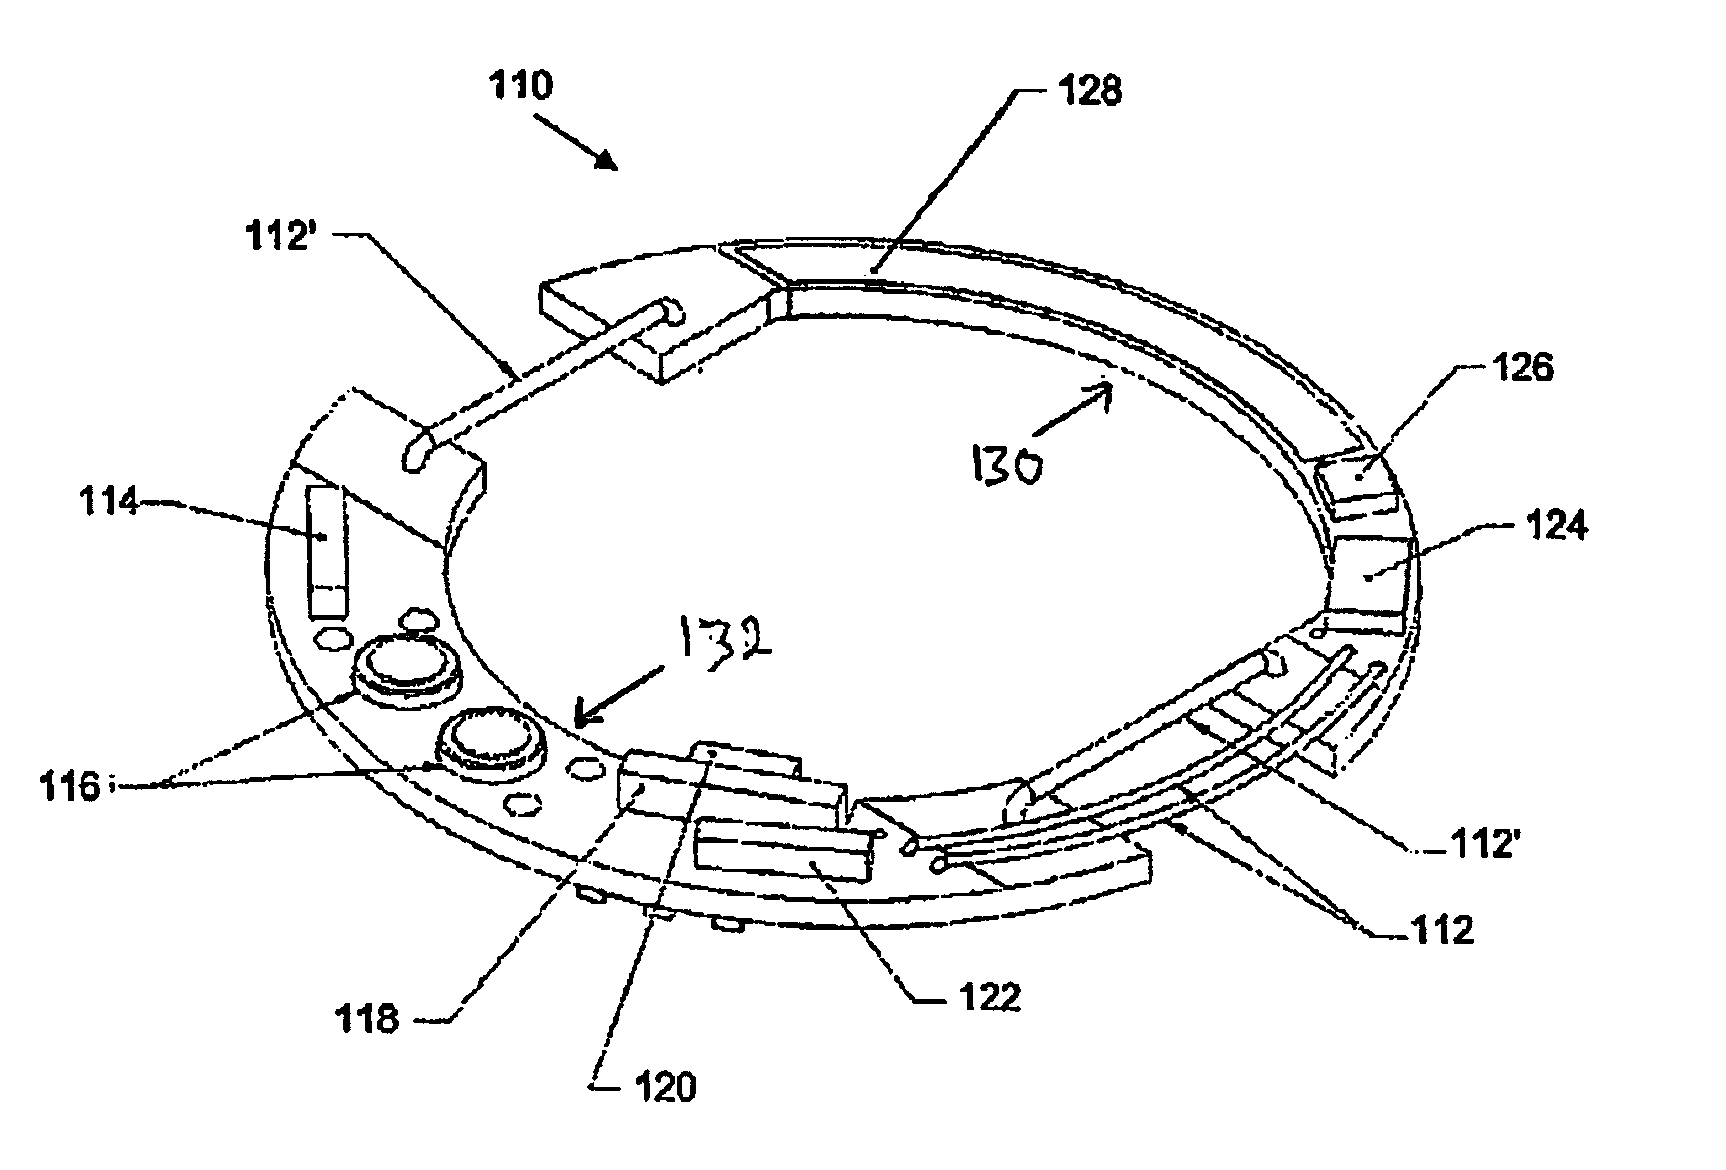 Apparatus and methods for monitoring subjects